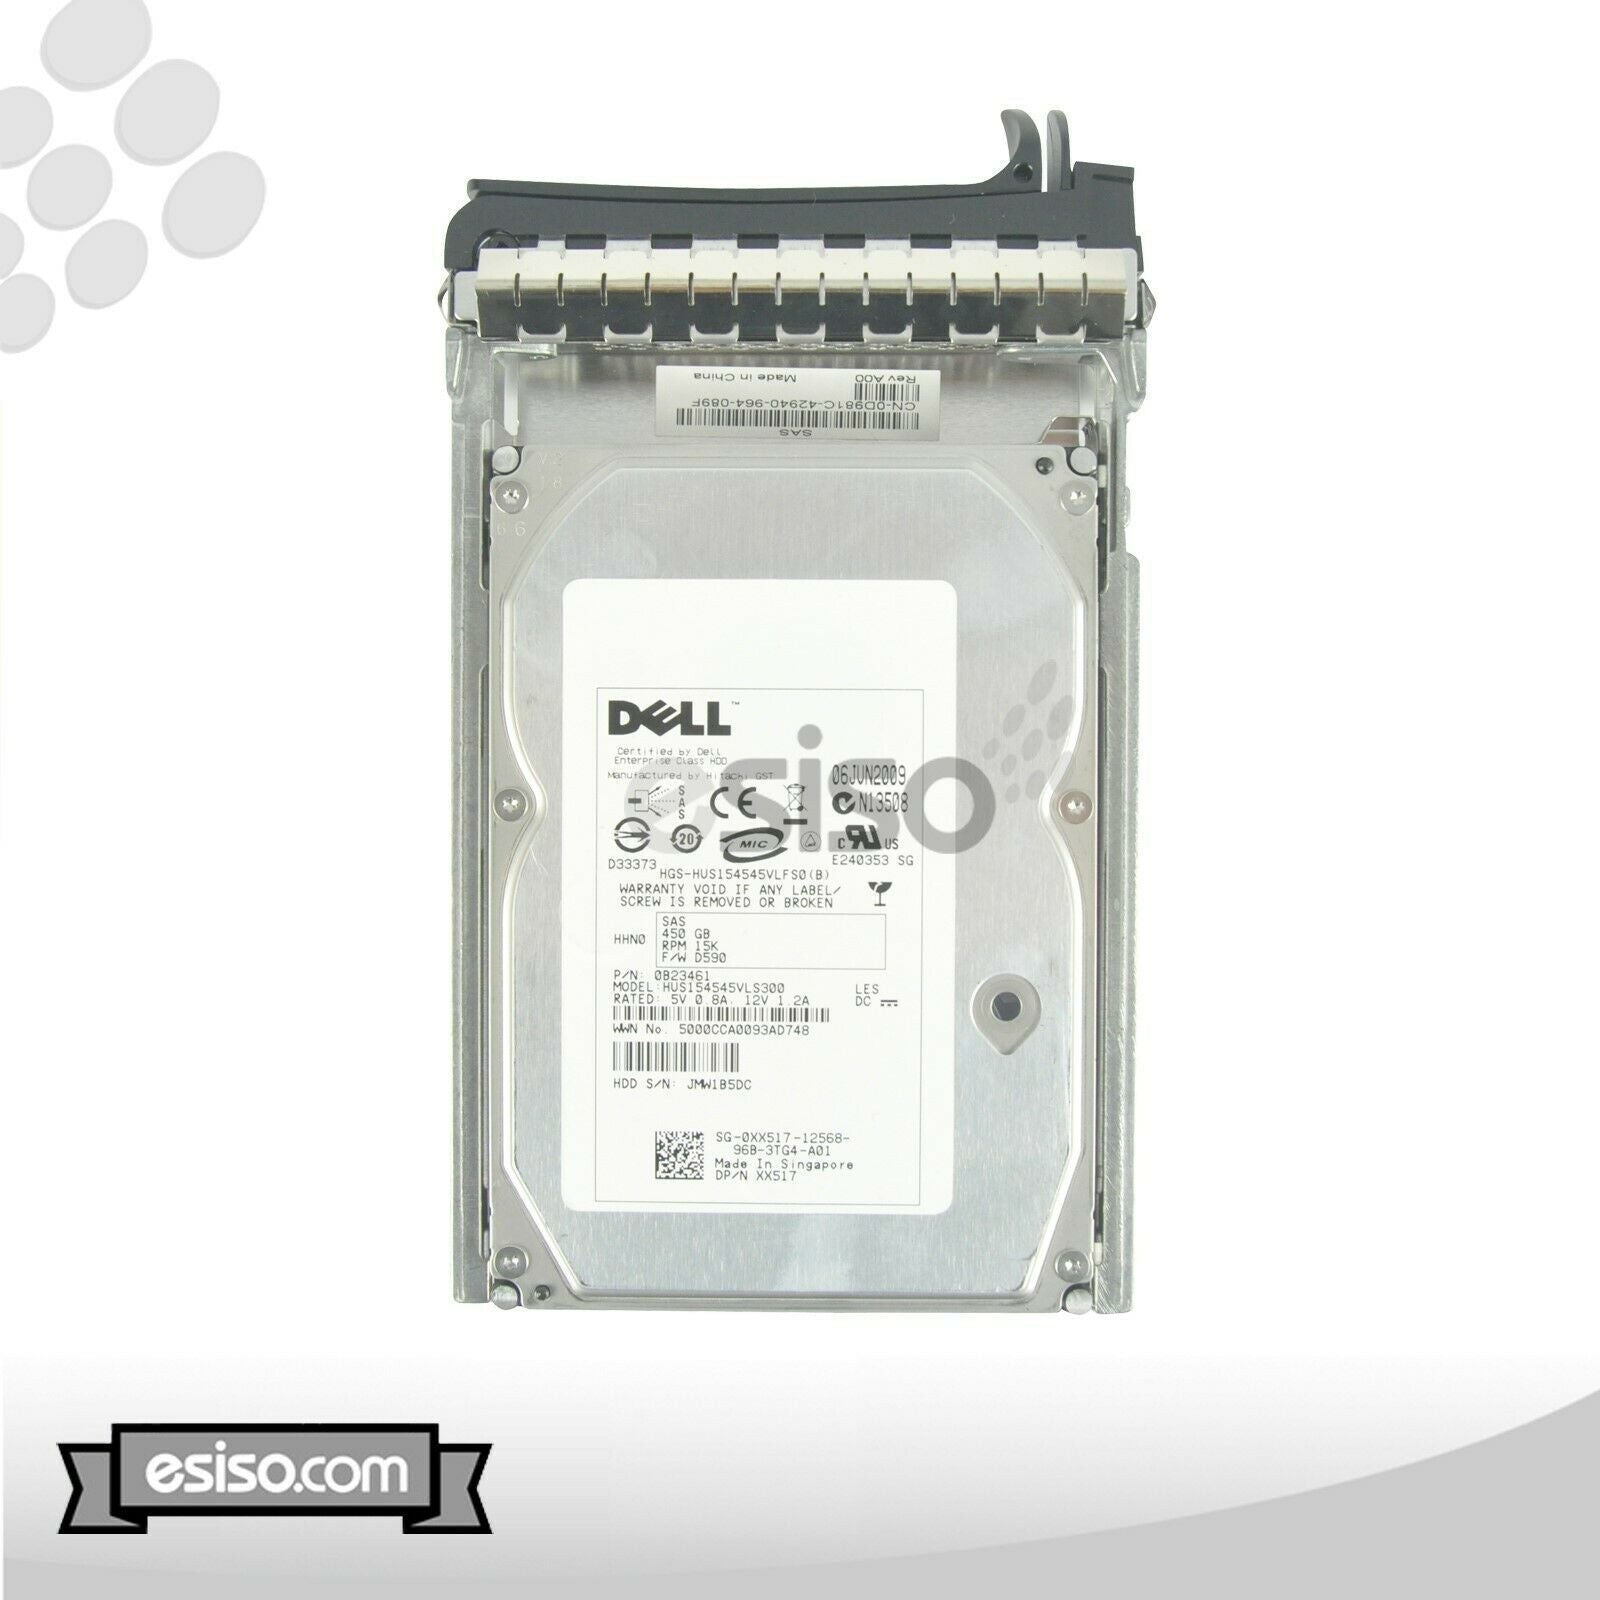 LOT OF 2 XX517 HUS154545VLS300 DELL 450GB 15K 3.5'' SAS HDD FOR DELL 1900 1950